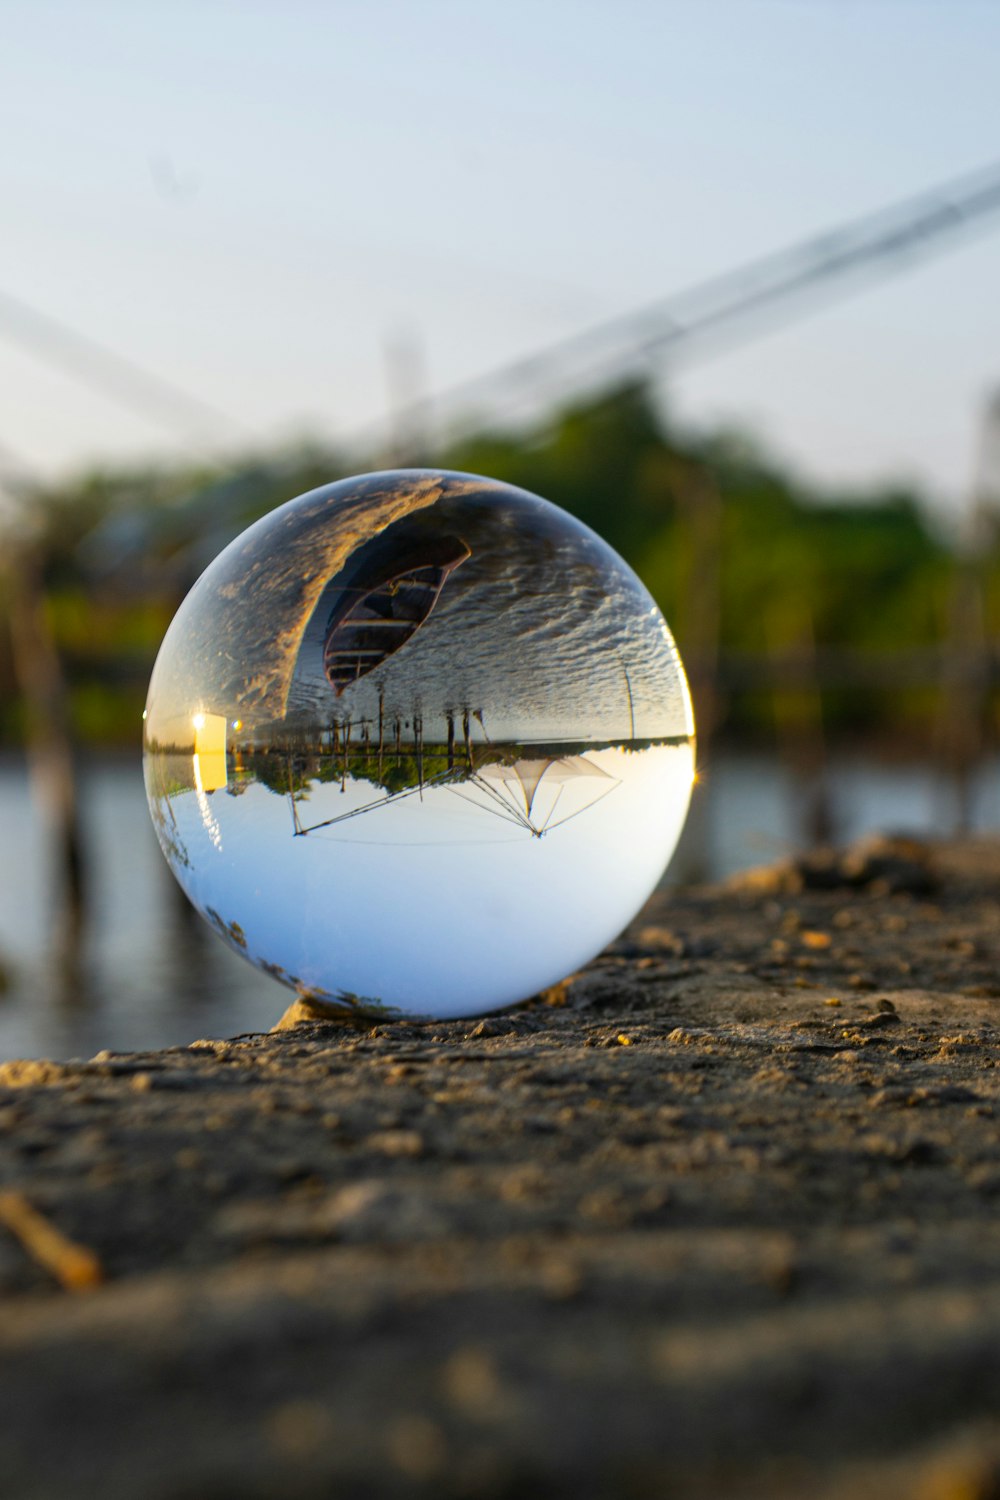 clear glass ball on brown soil